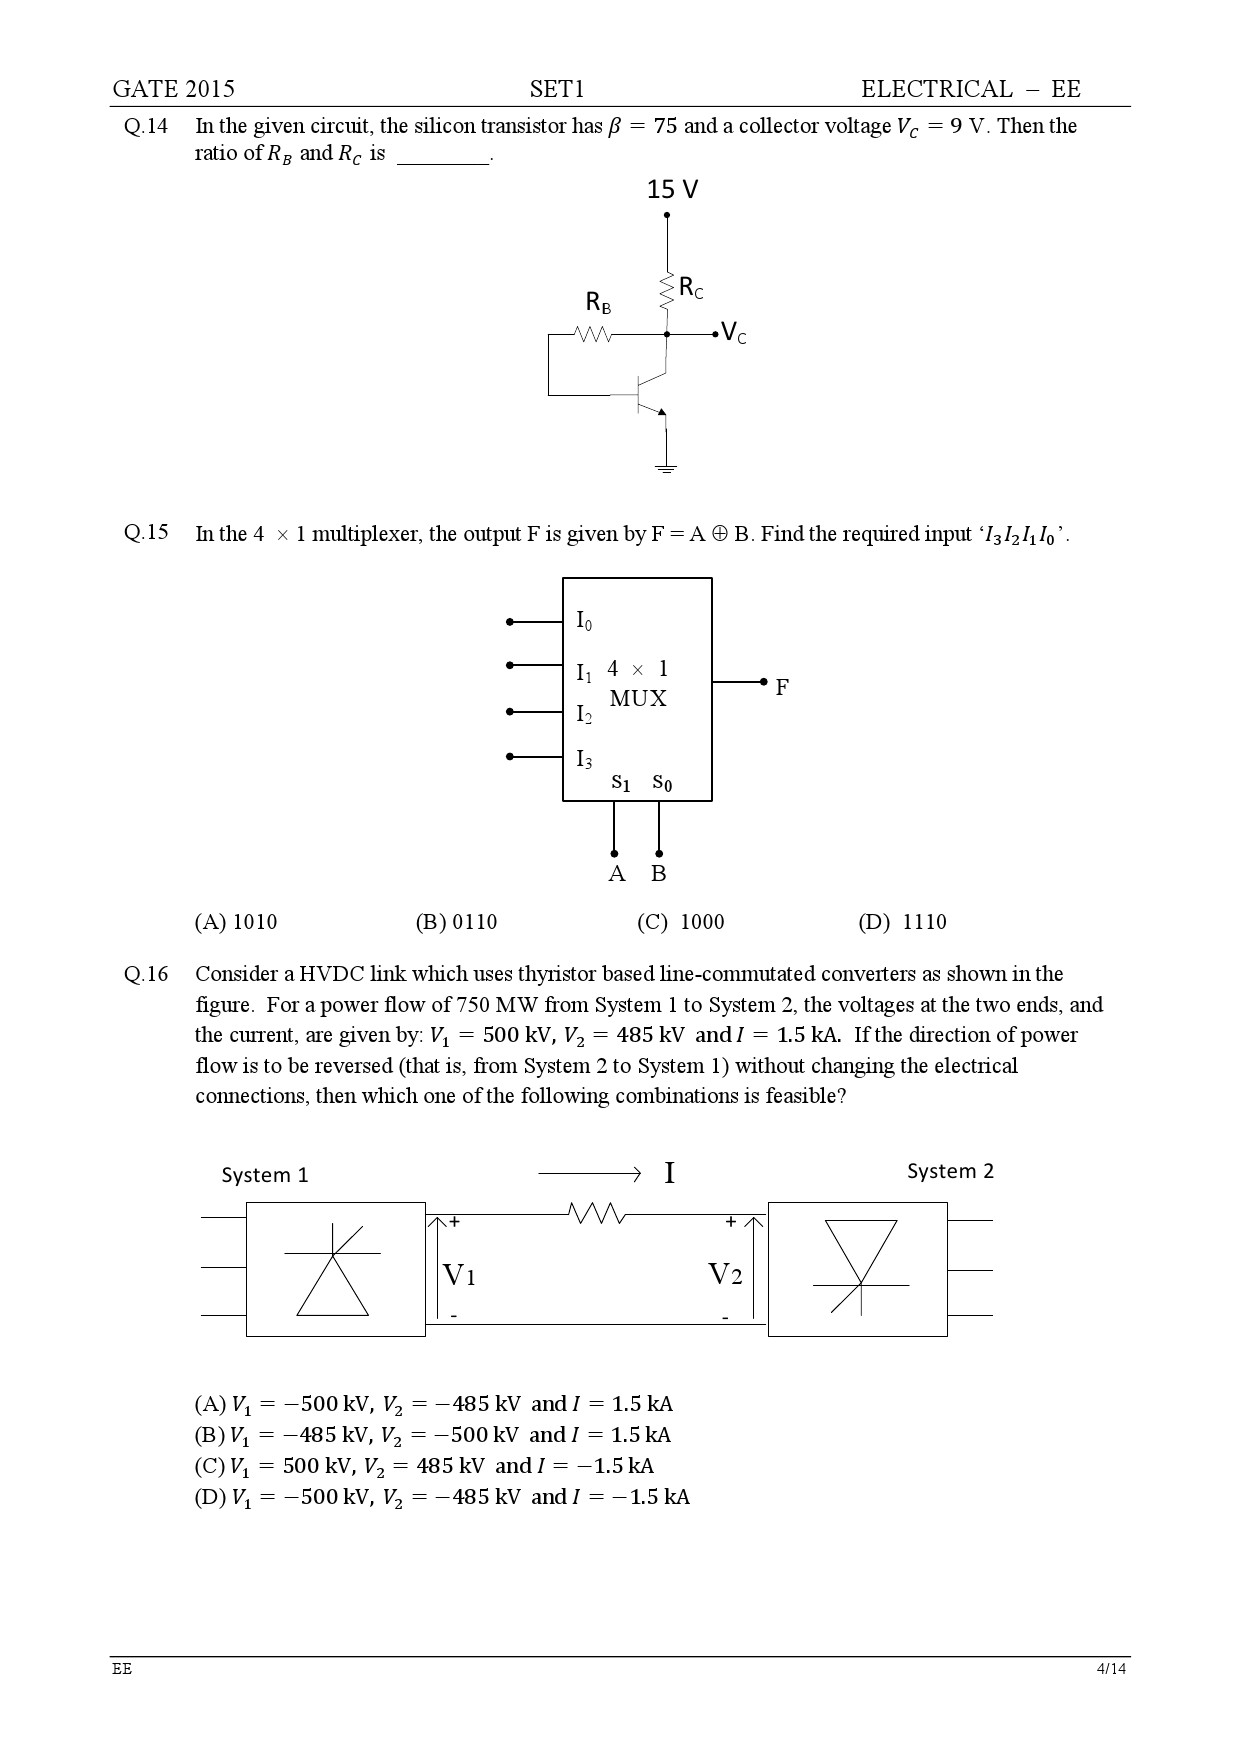 GATE Exam Question Paper 2015 Electrical Engineering Set 1 4